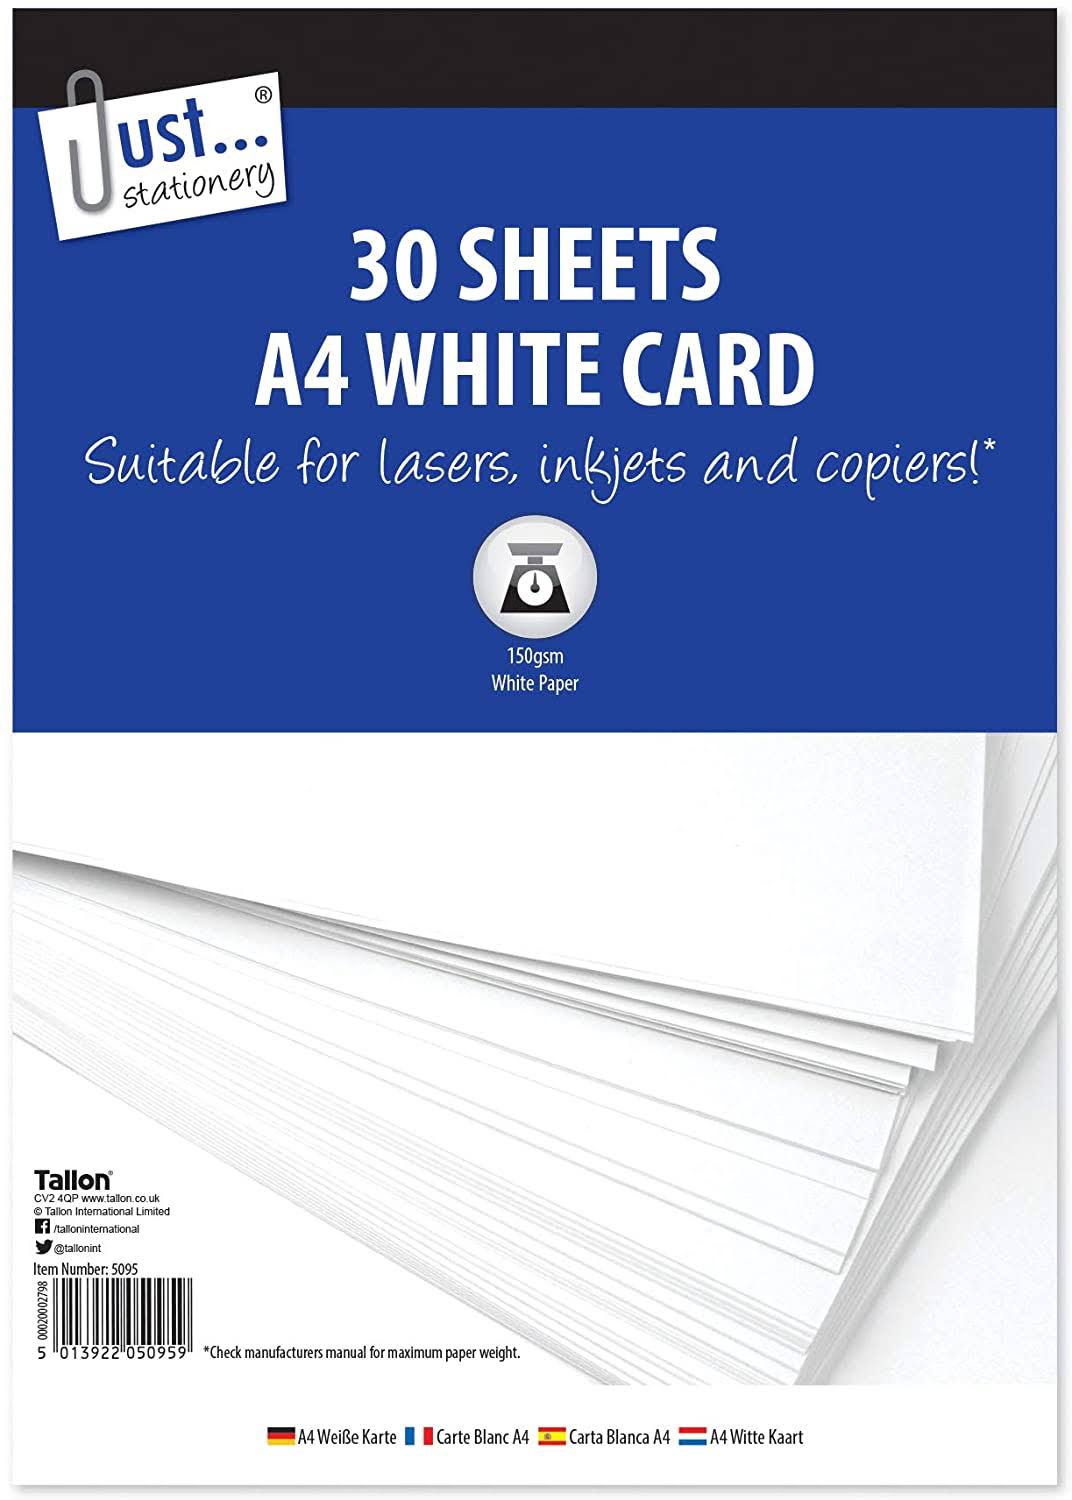 Just Stationery A4 White Card - White, 210mm x 297mm, 30 Sheets